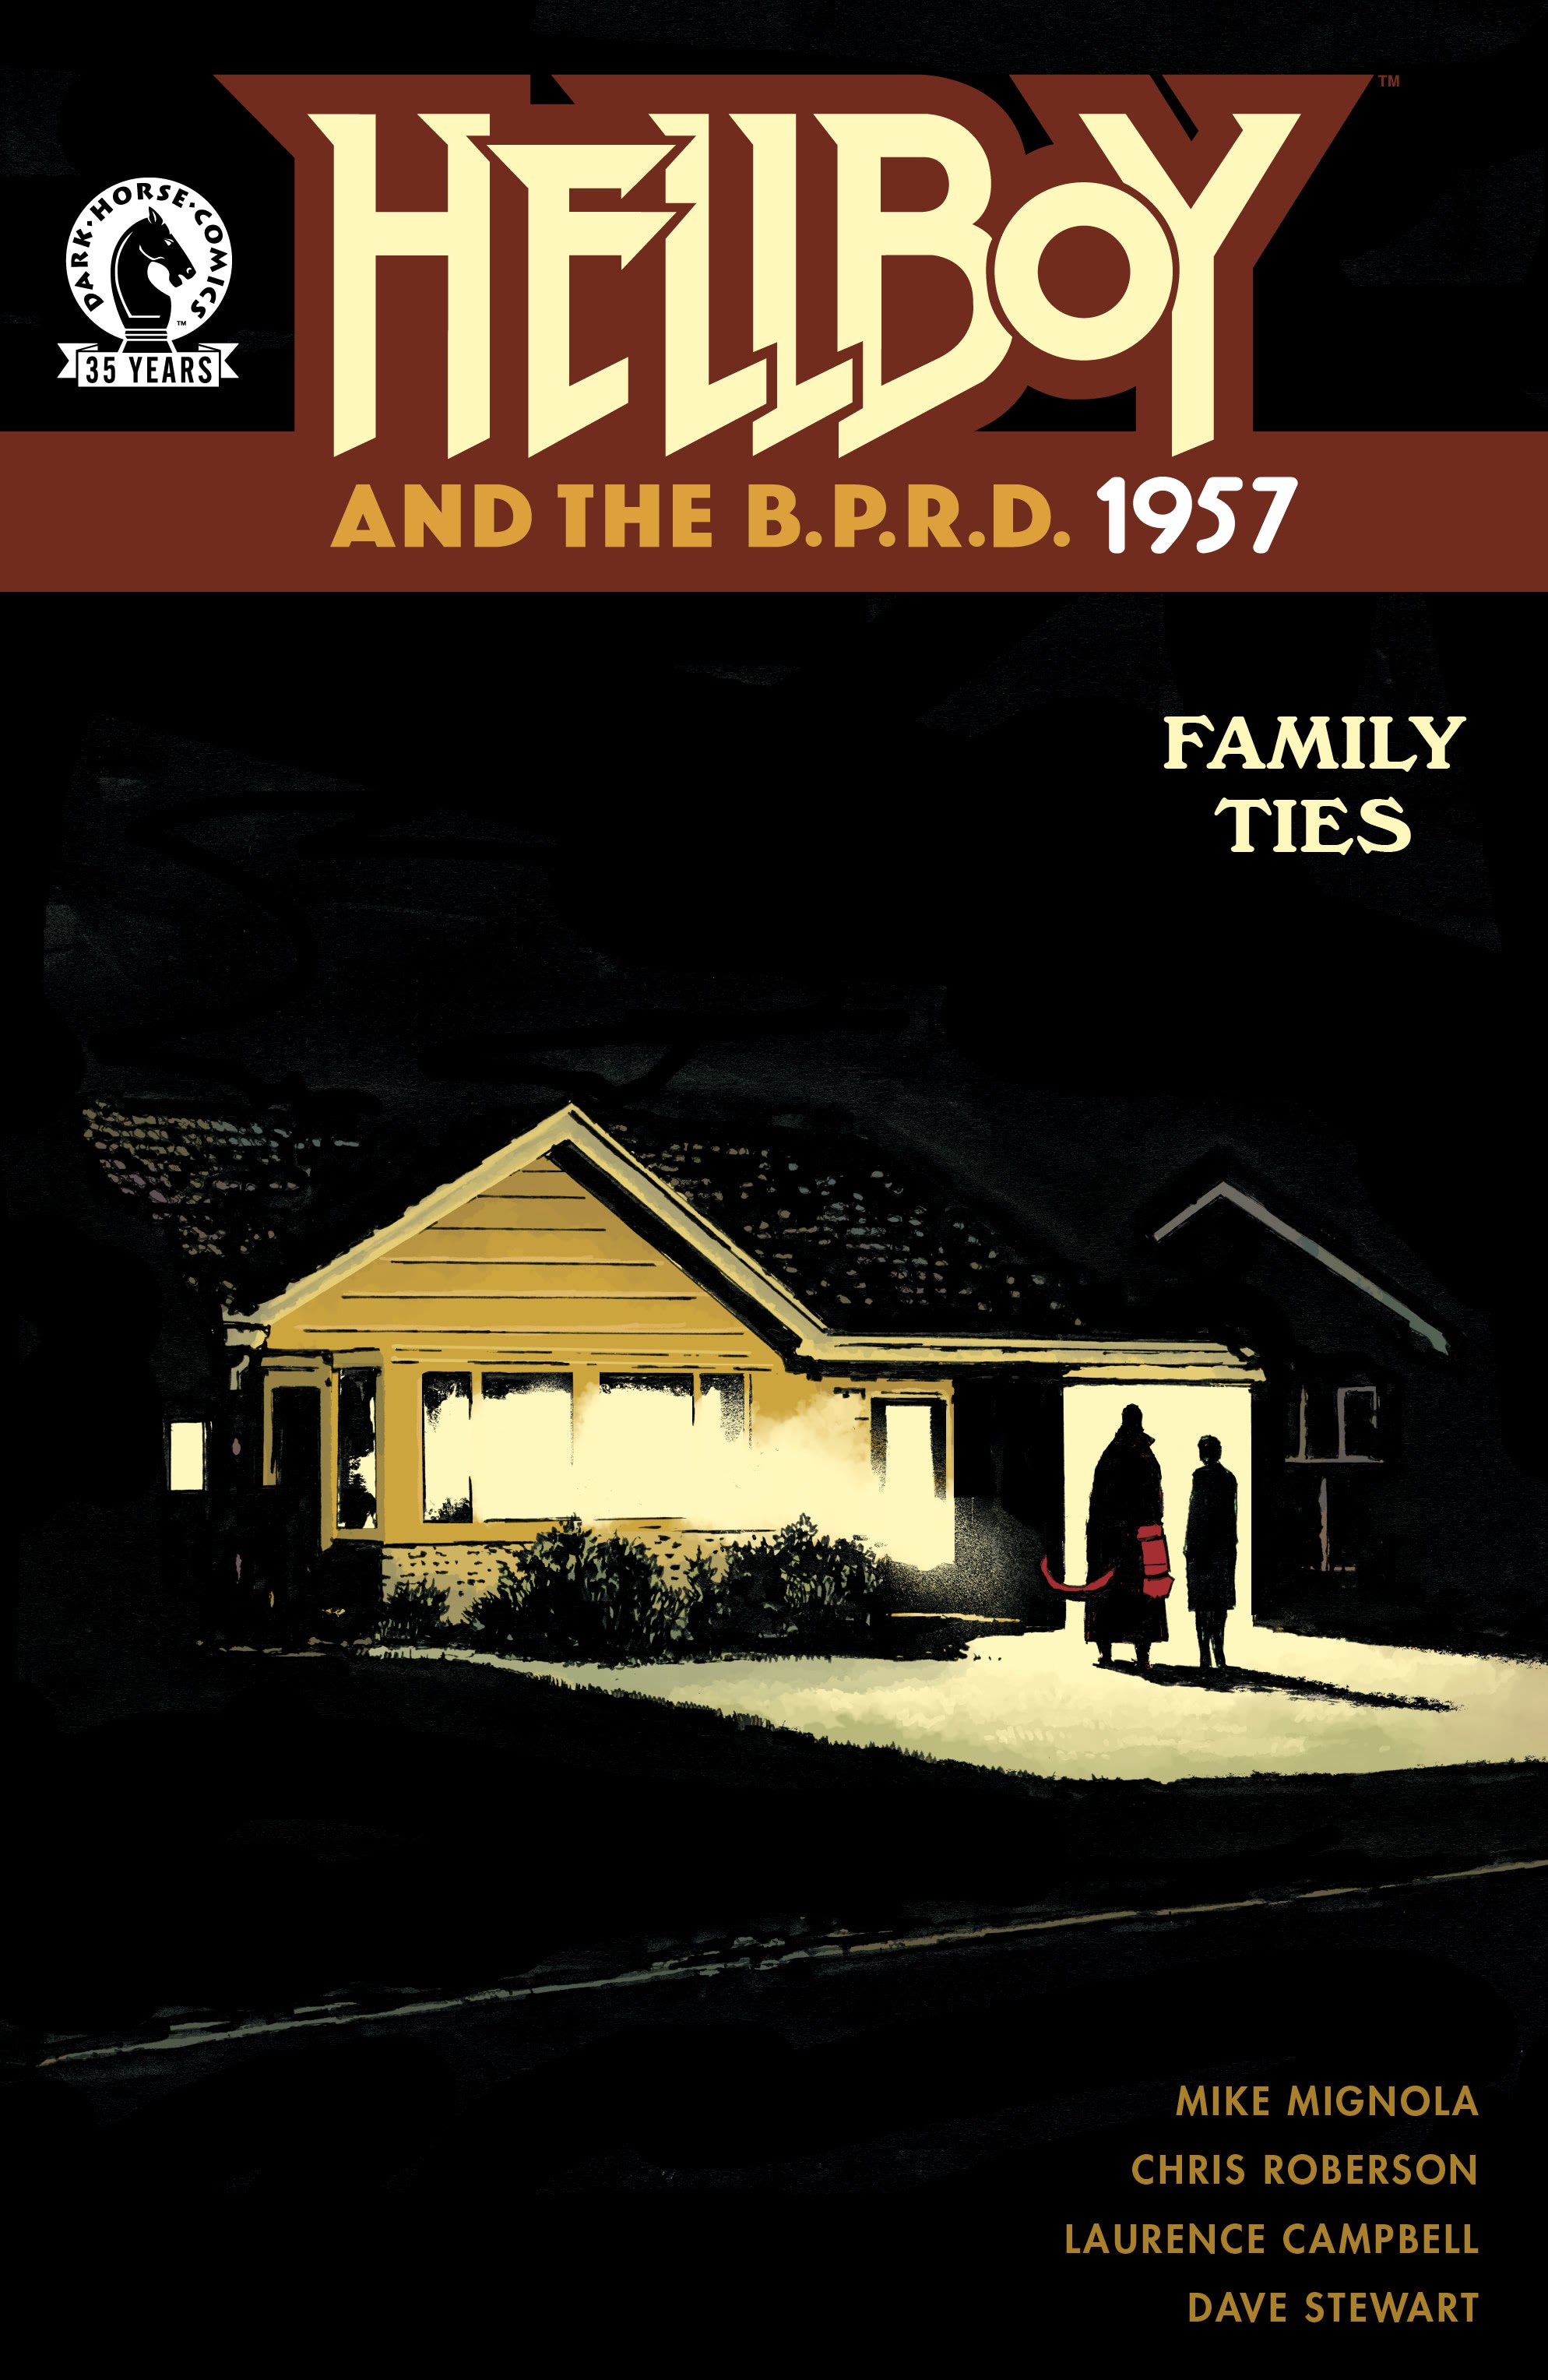 Read online Hellboy and the B.P.R.D.: 1957 - Family Ties comic -  Issue # Full - 1